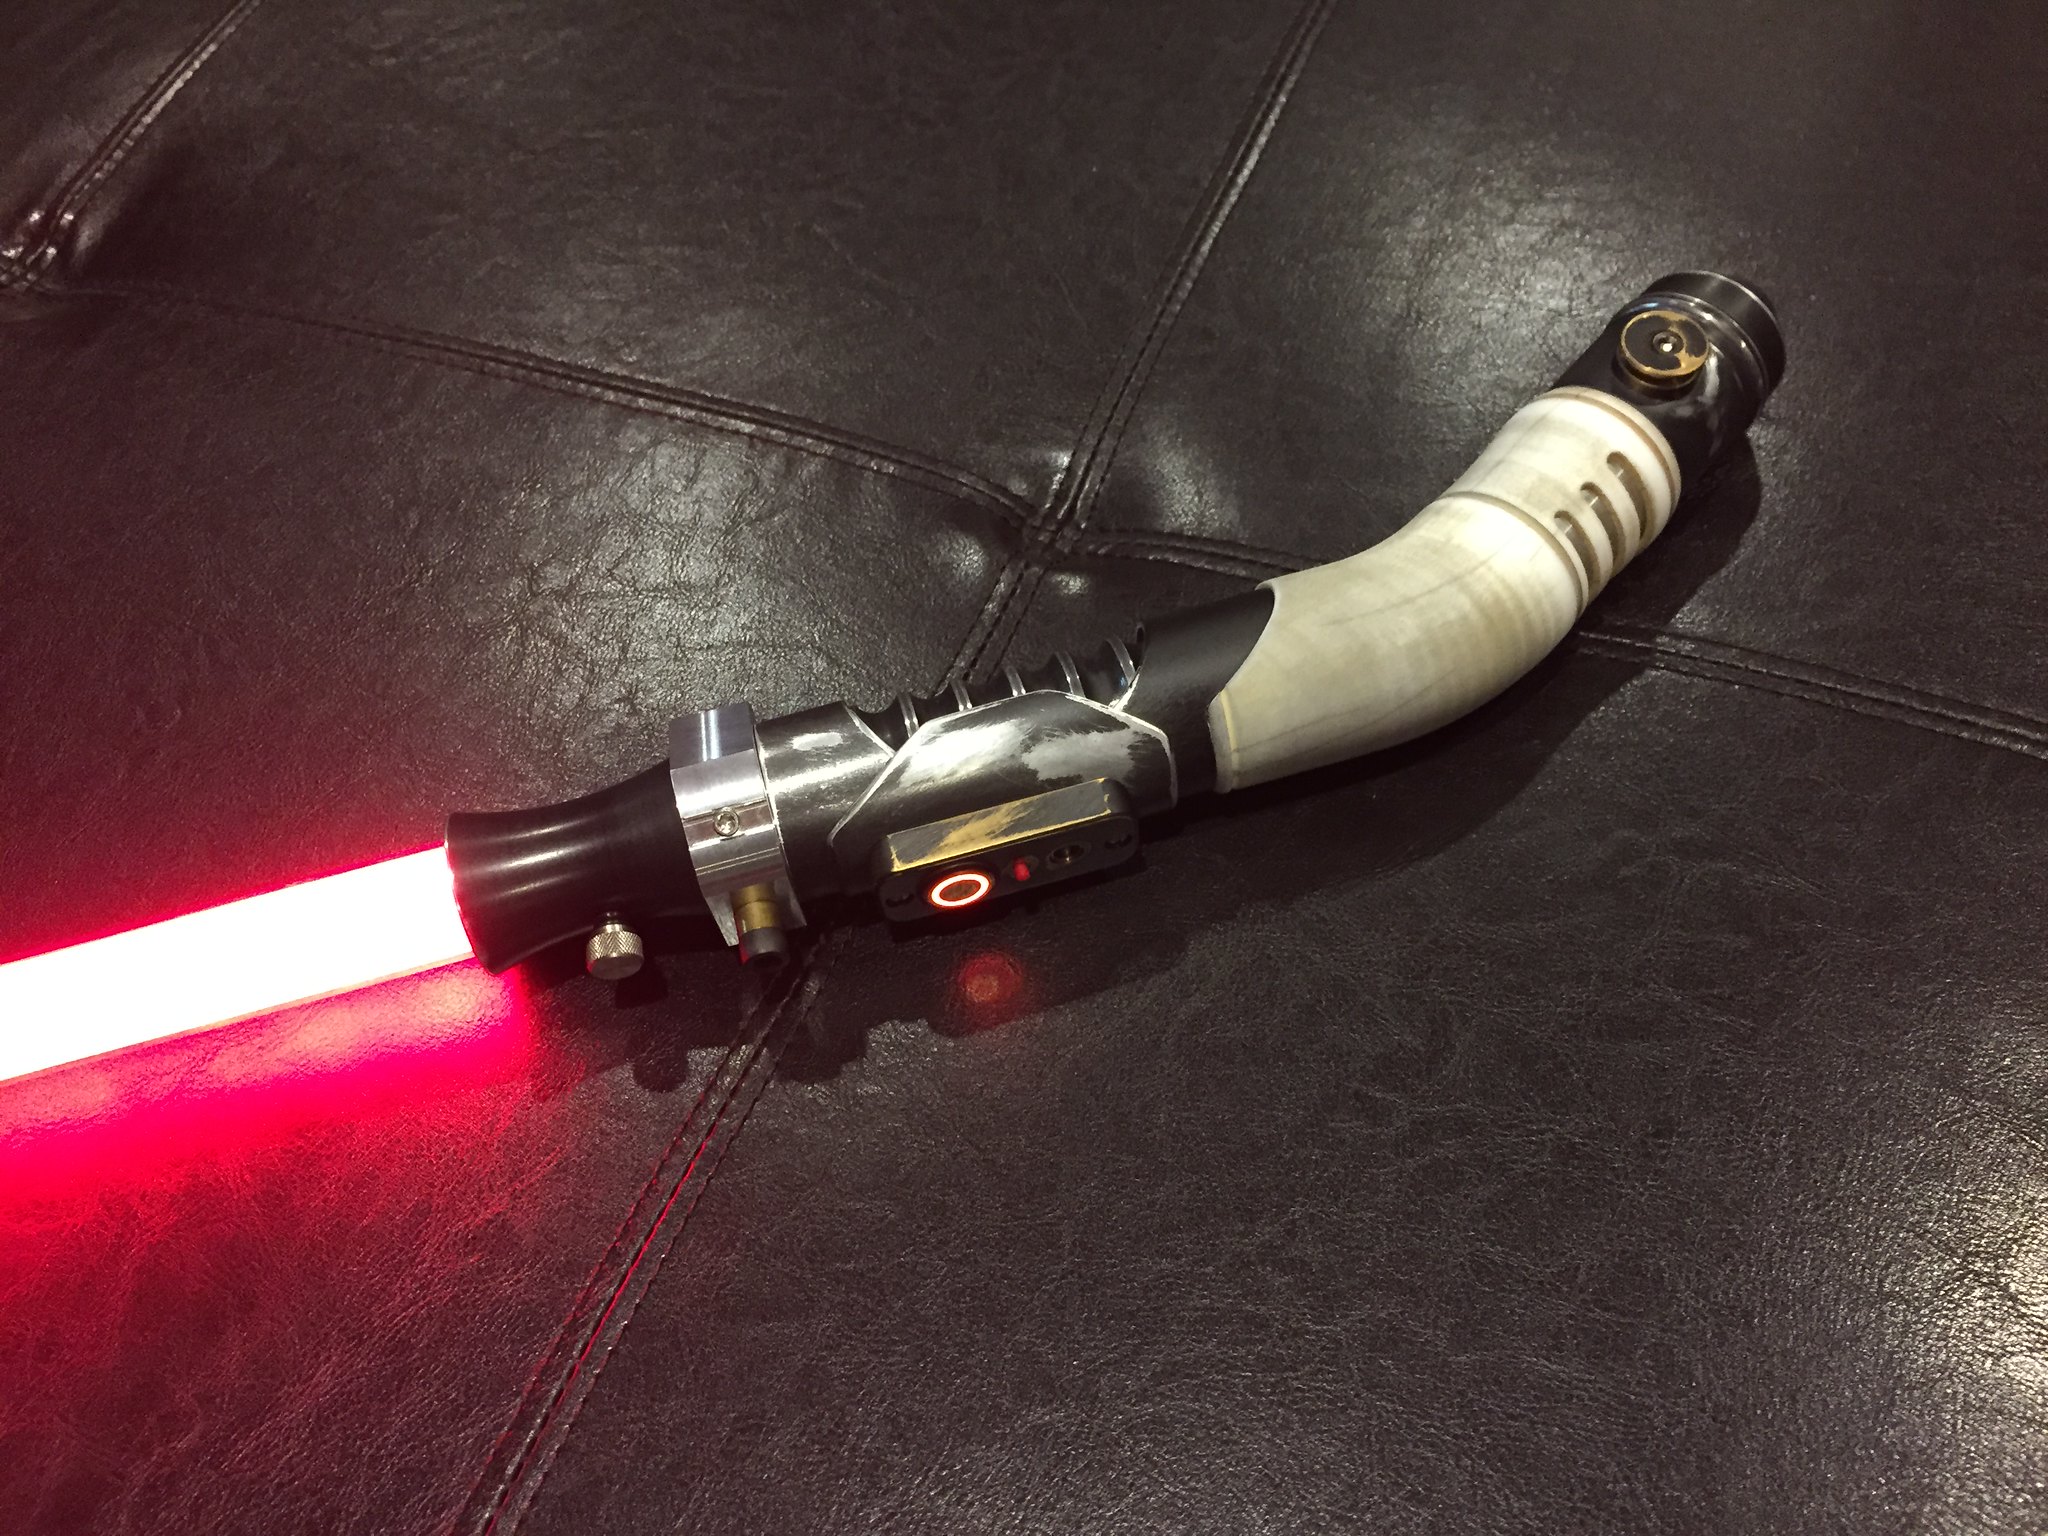 Sith Sorceress Custom Curved String Blade Lightsaber - YouTube. 